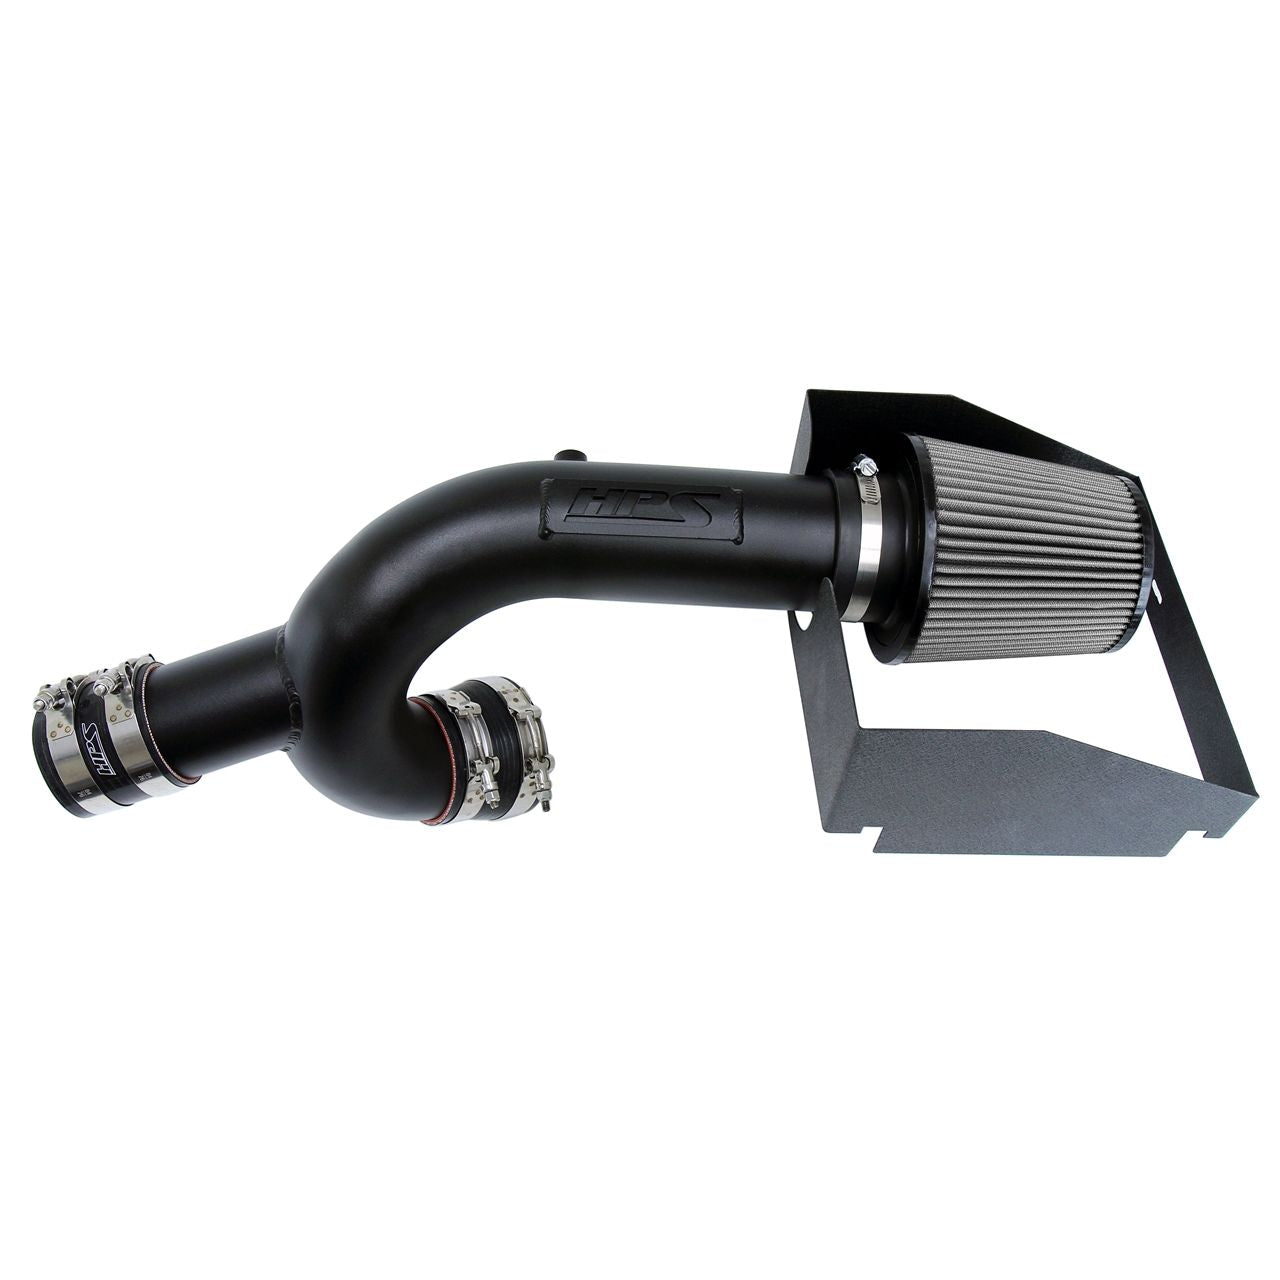 HPS Black Cold Air Intake Kit with Heat Shield for 15-16 Ford F150 3.5L Ecoboost Turbo